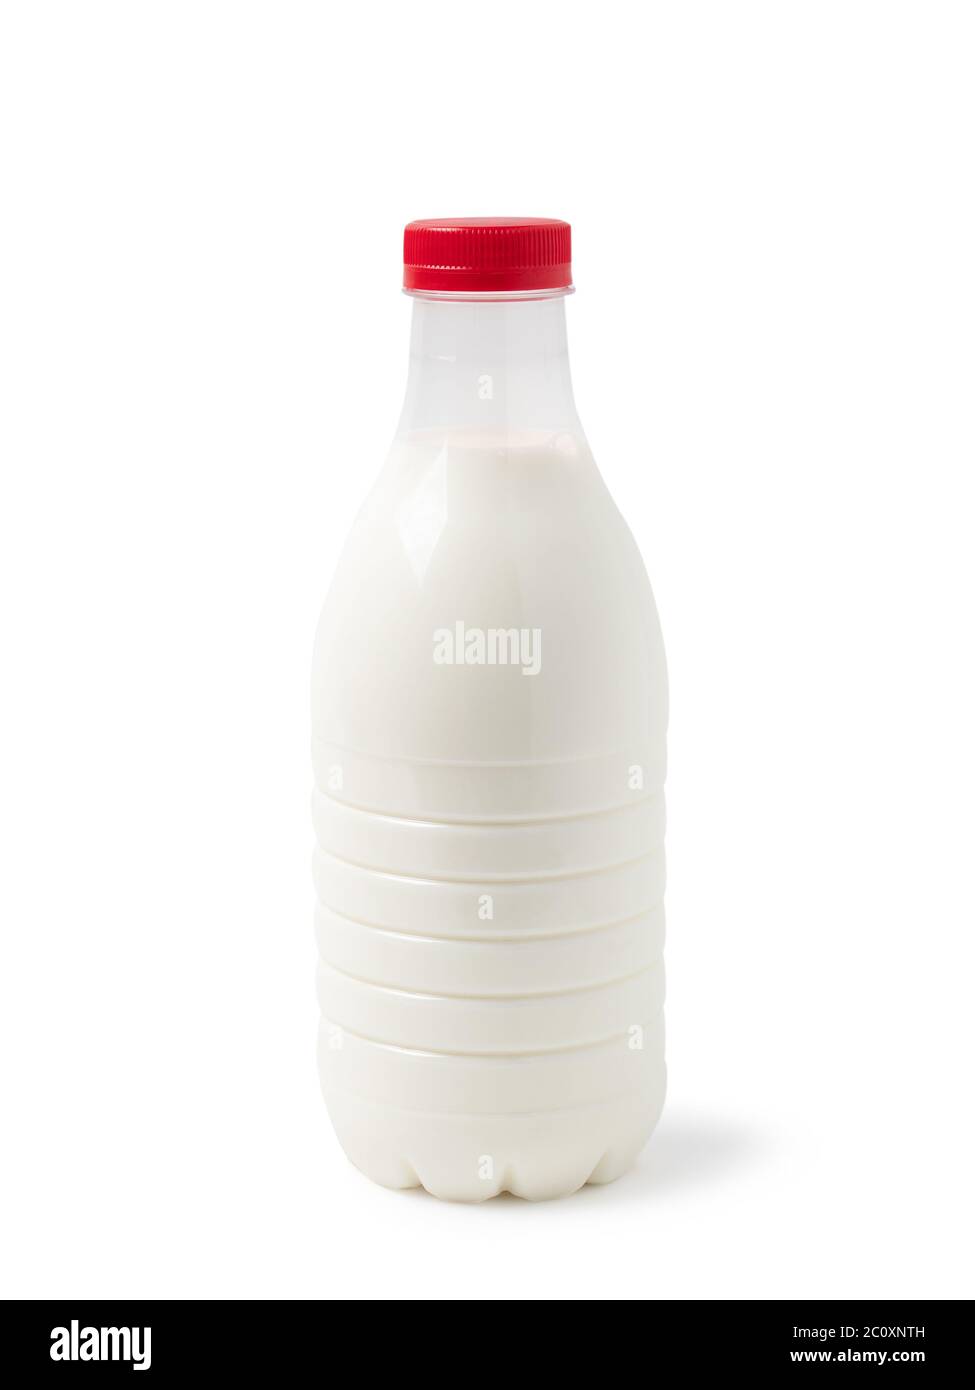 Liter plastic bottle of milk with a red cap isolated on a white background with clipping paths with shadow and no shadow Stock Photo